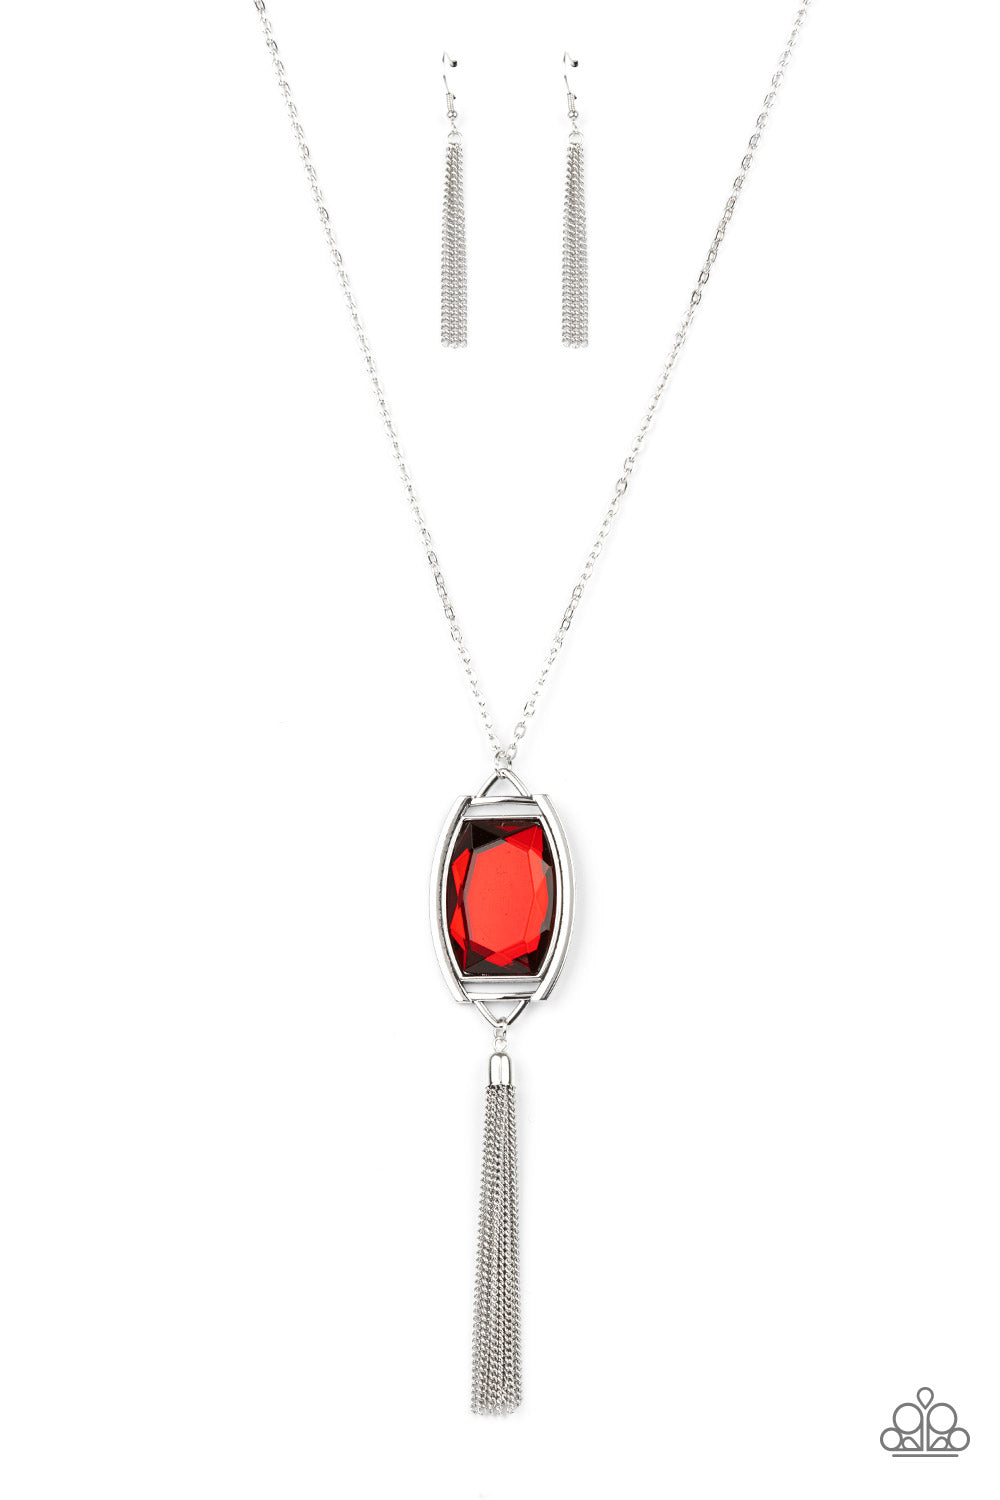 Encased in an antiqued silver frame, an oversized red gem swings from the bottom of an ornate silver chain. A shimmery silver chain tassel swings from the bottom of the sparkly pendant, creating a regal talisman. Features an adjustable clasp closure.